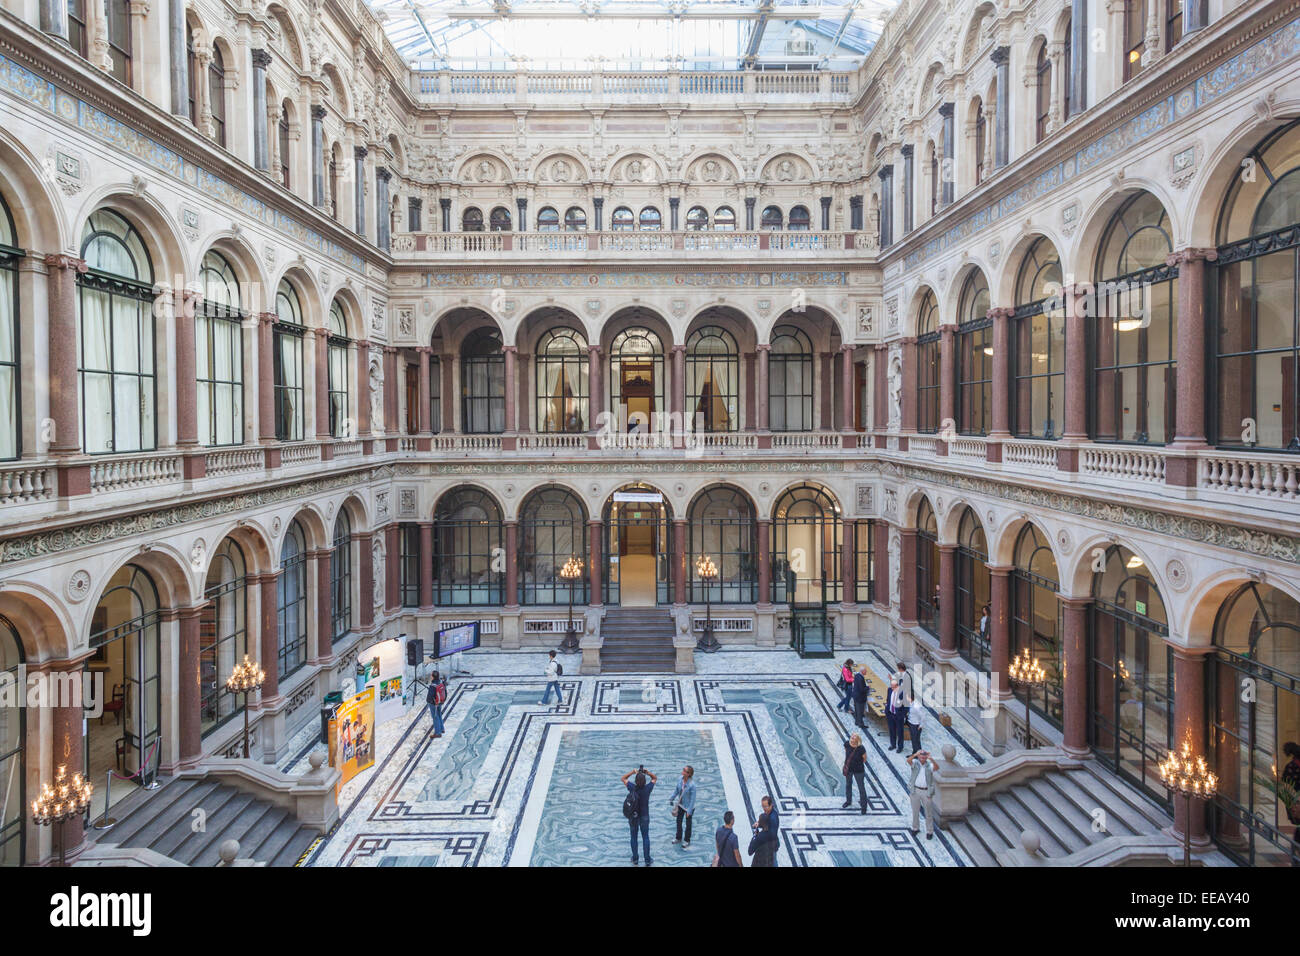 Inghilterra, Londra, Whitehall, il Foreign Office, cortile interno Foto Stock